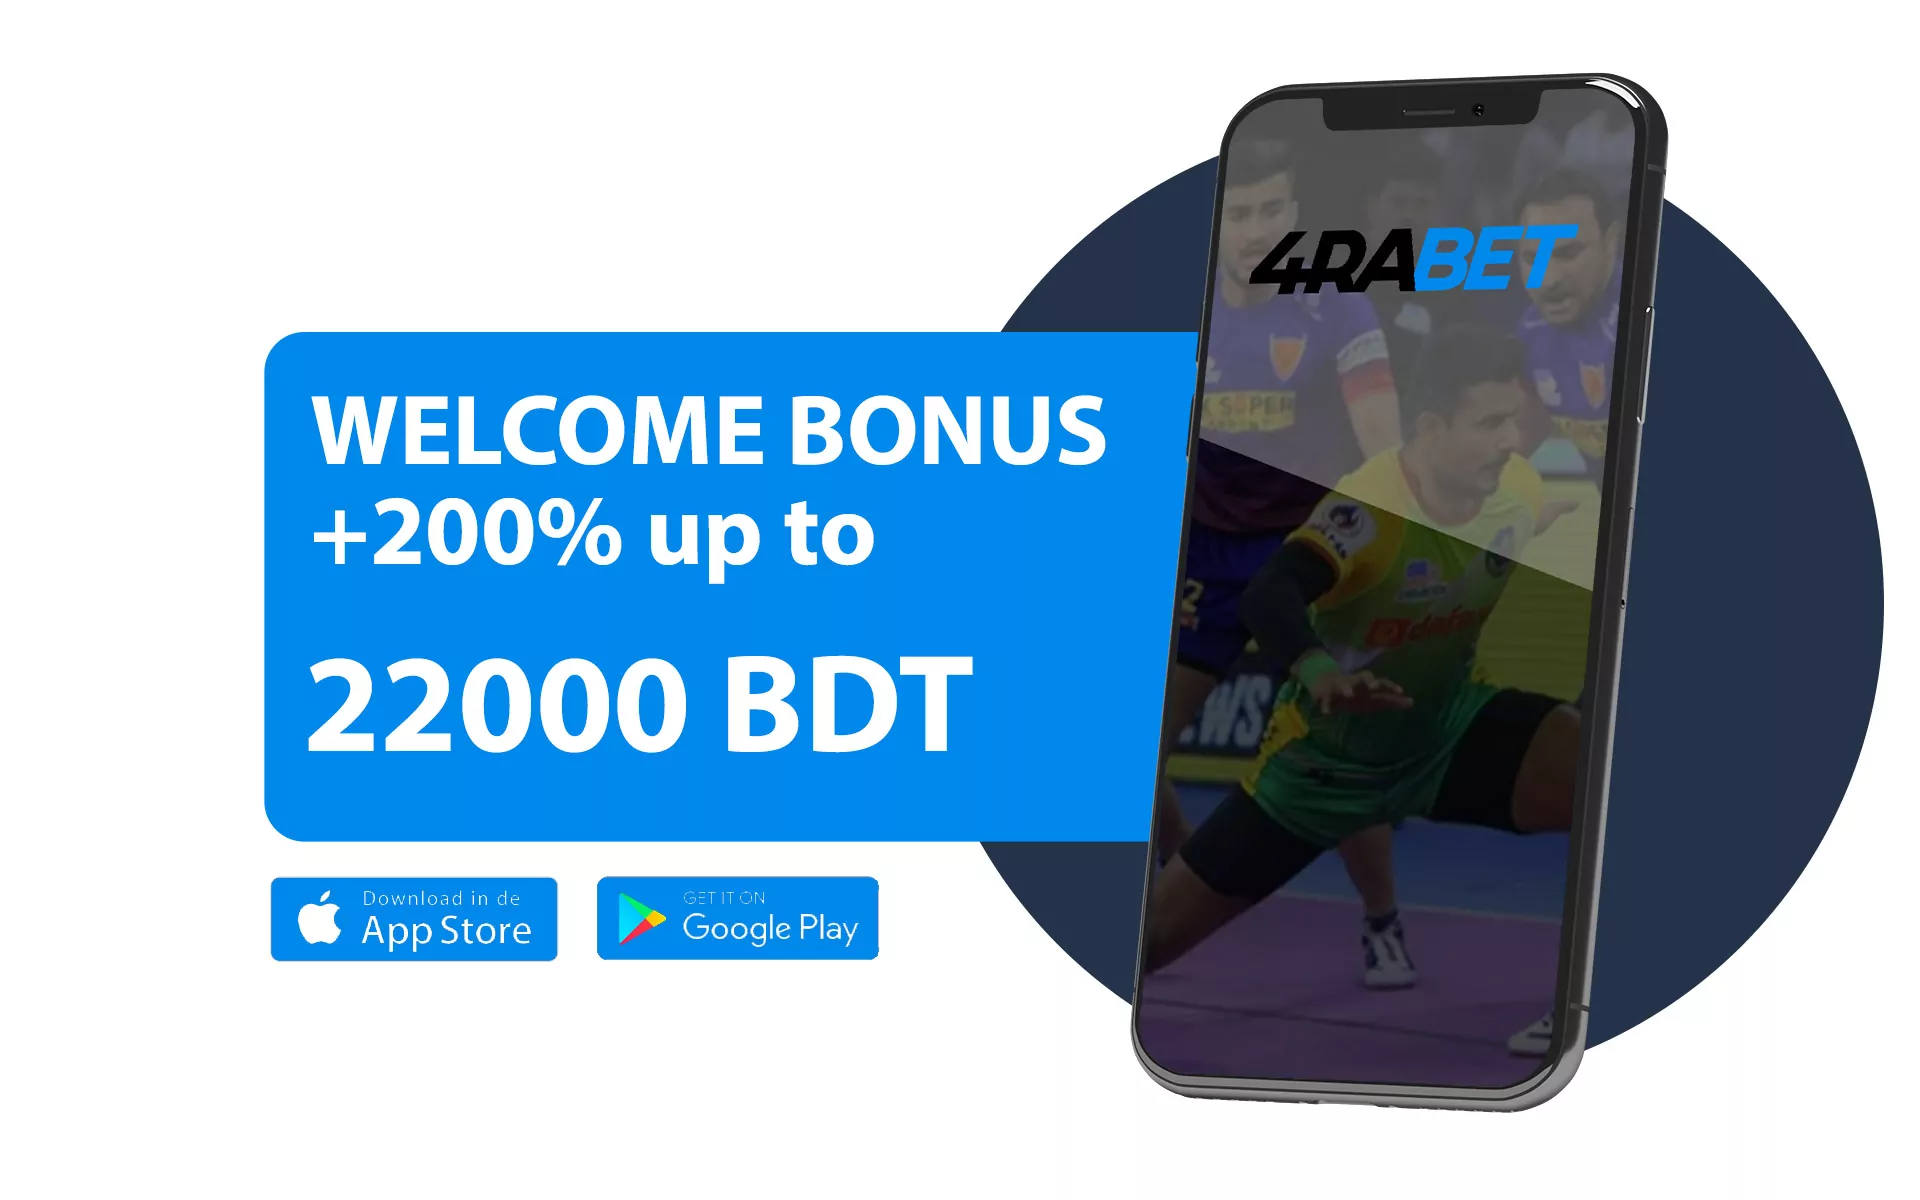 Bet on kabaddi with 4rabet online and get welcome bonus up to 22,000 BDT.